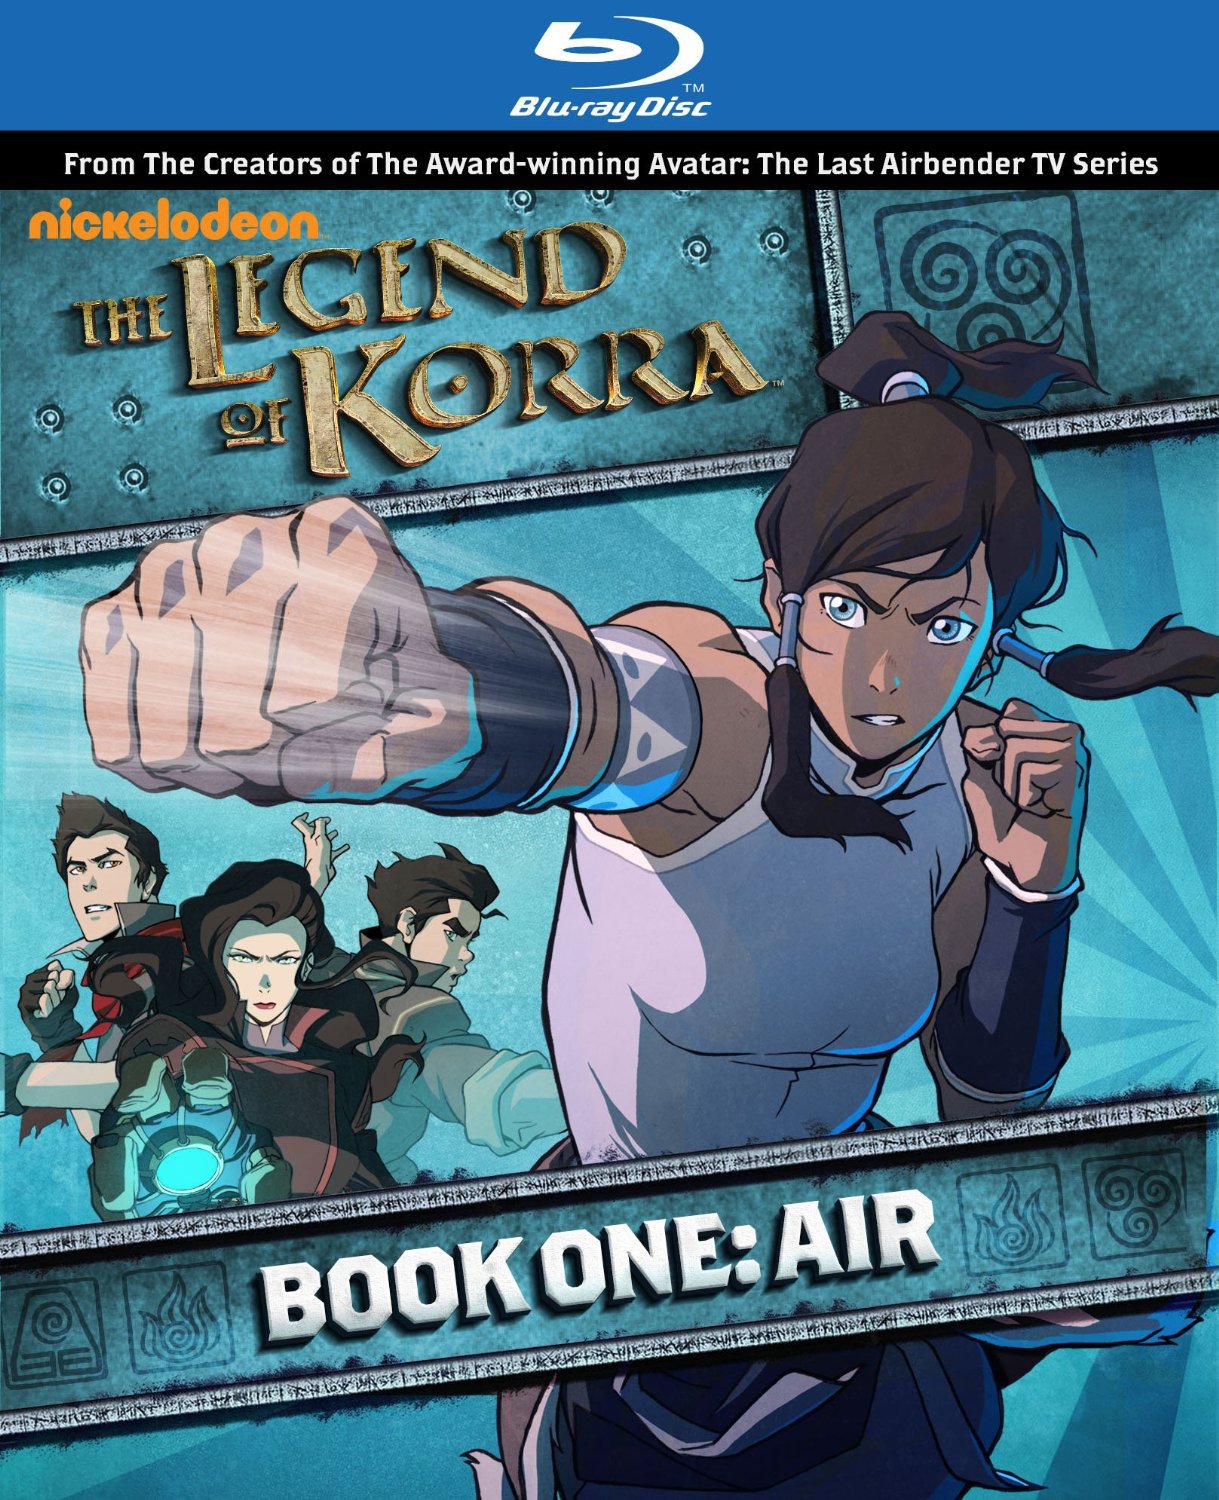 Legend of Korra, The: Book One